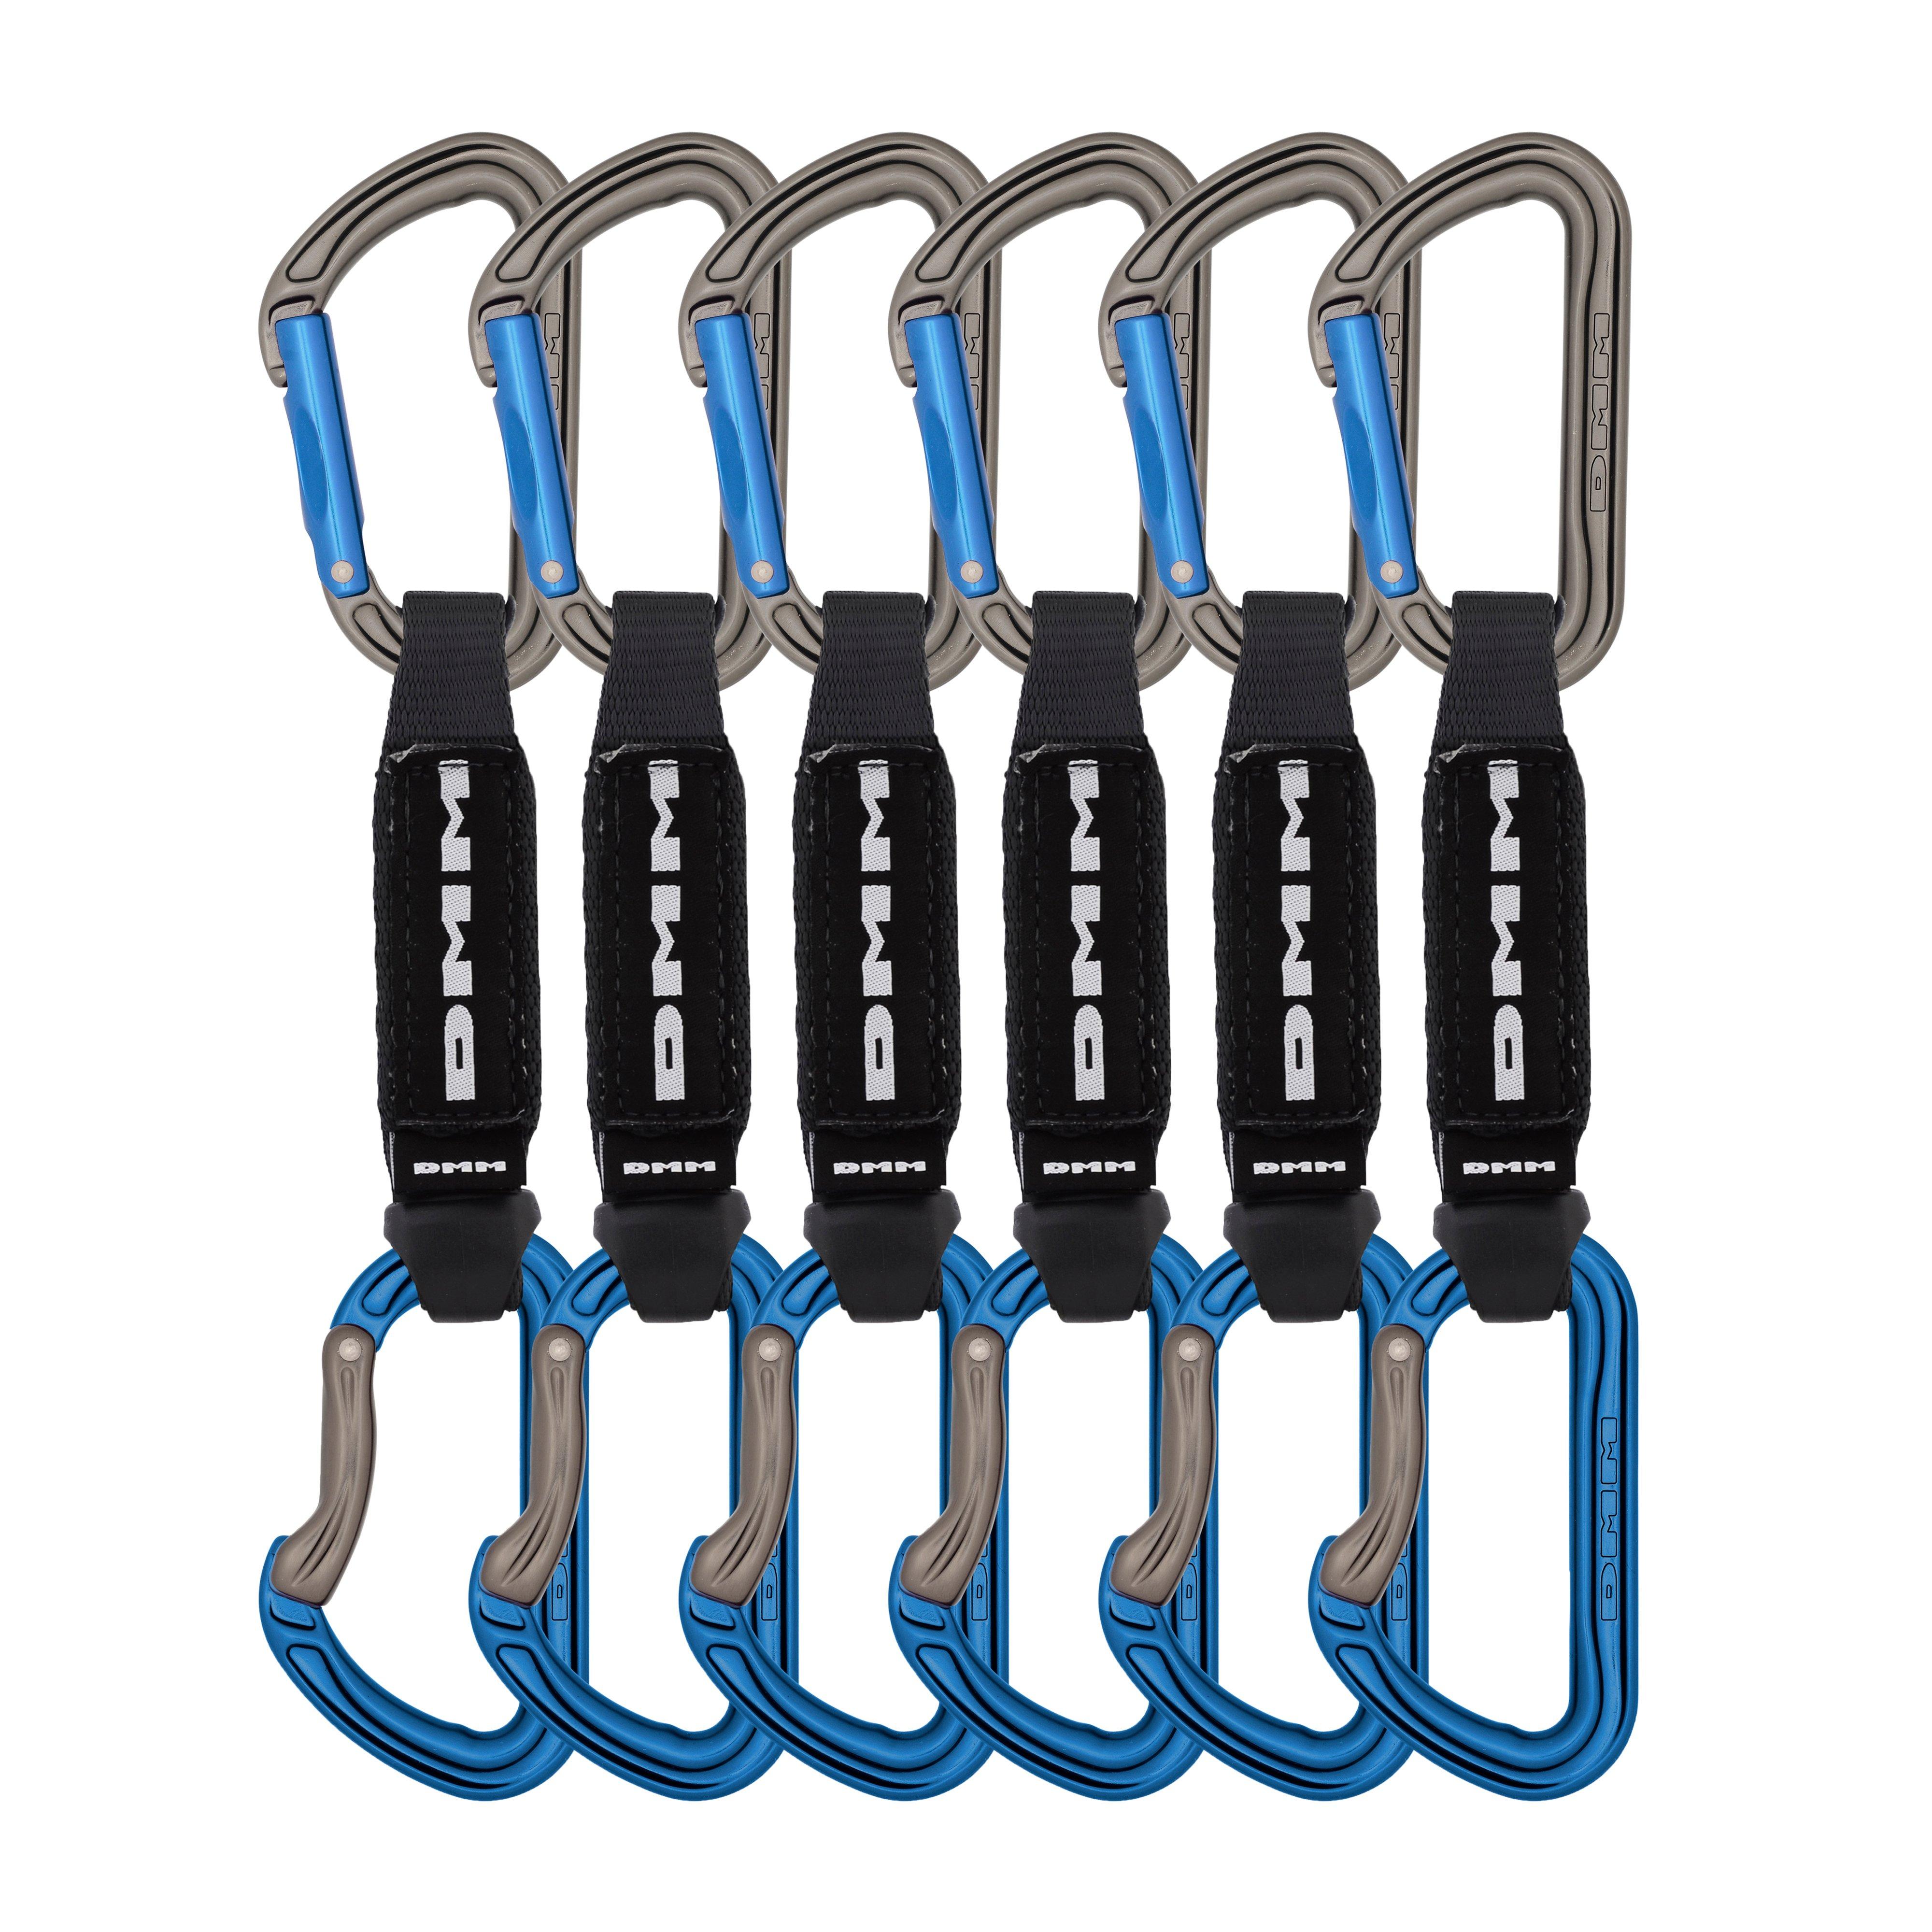  DMM Shadow 12cm Quickdraw (6 Pack), Blue